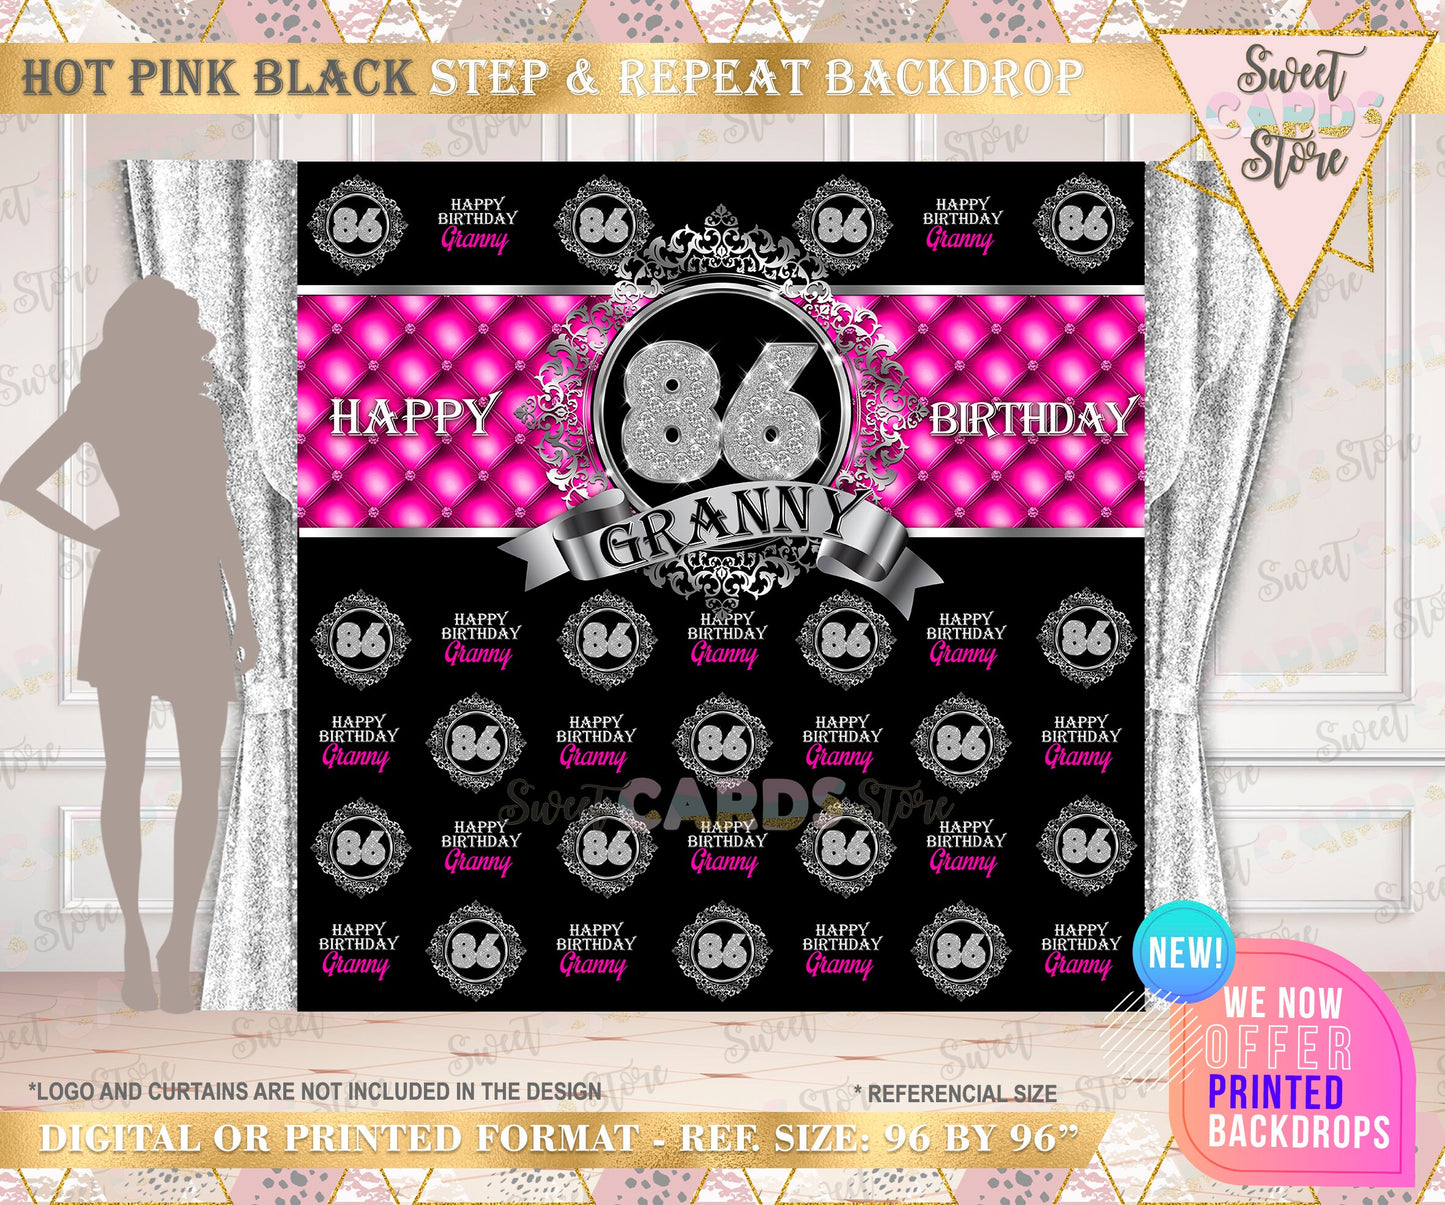 80th 60th Birthday Step and Repeat Printable party backdrop, Hot pink silver Black Backdrop, 60th 50th 40th Birthday step  repeat backdrop